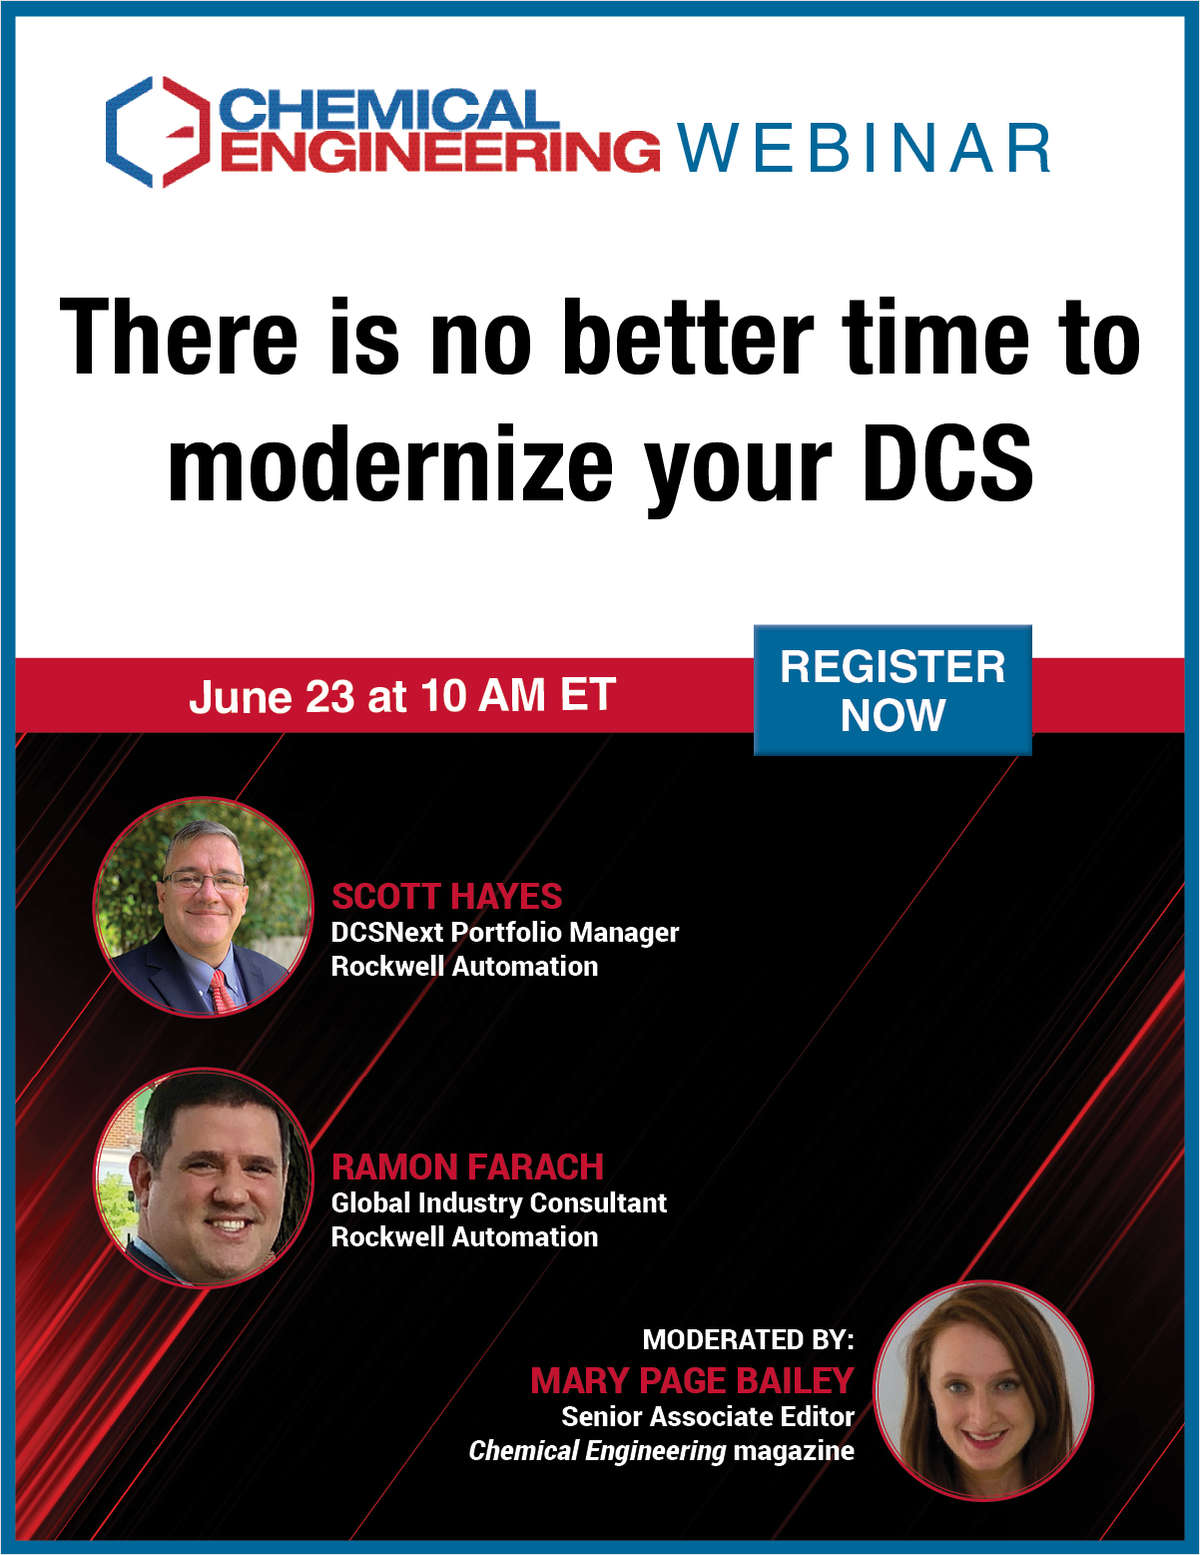 There is no better time to modernize your DCS